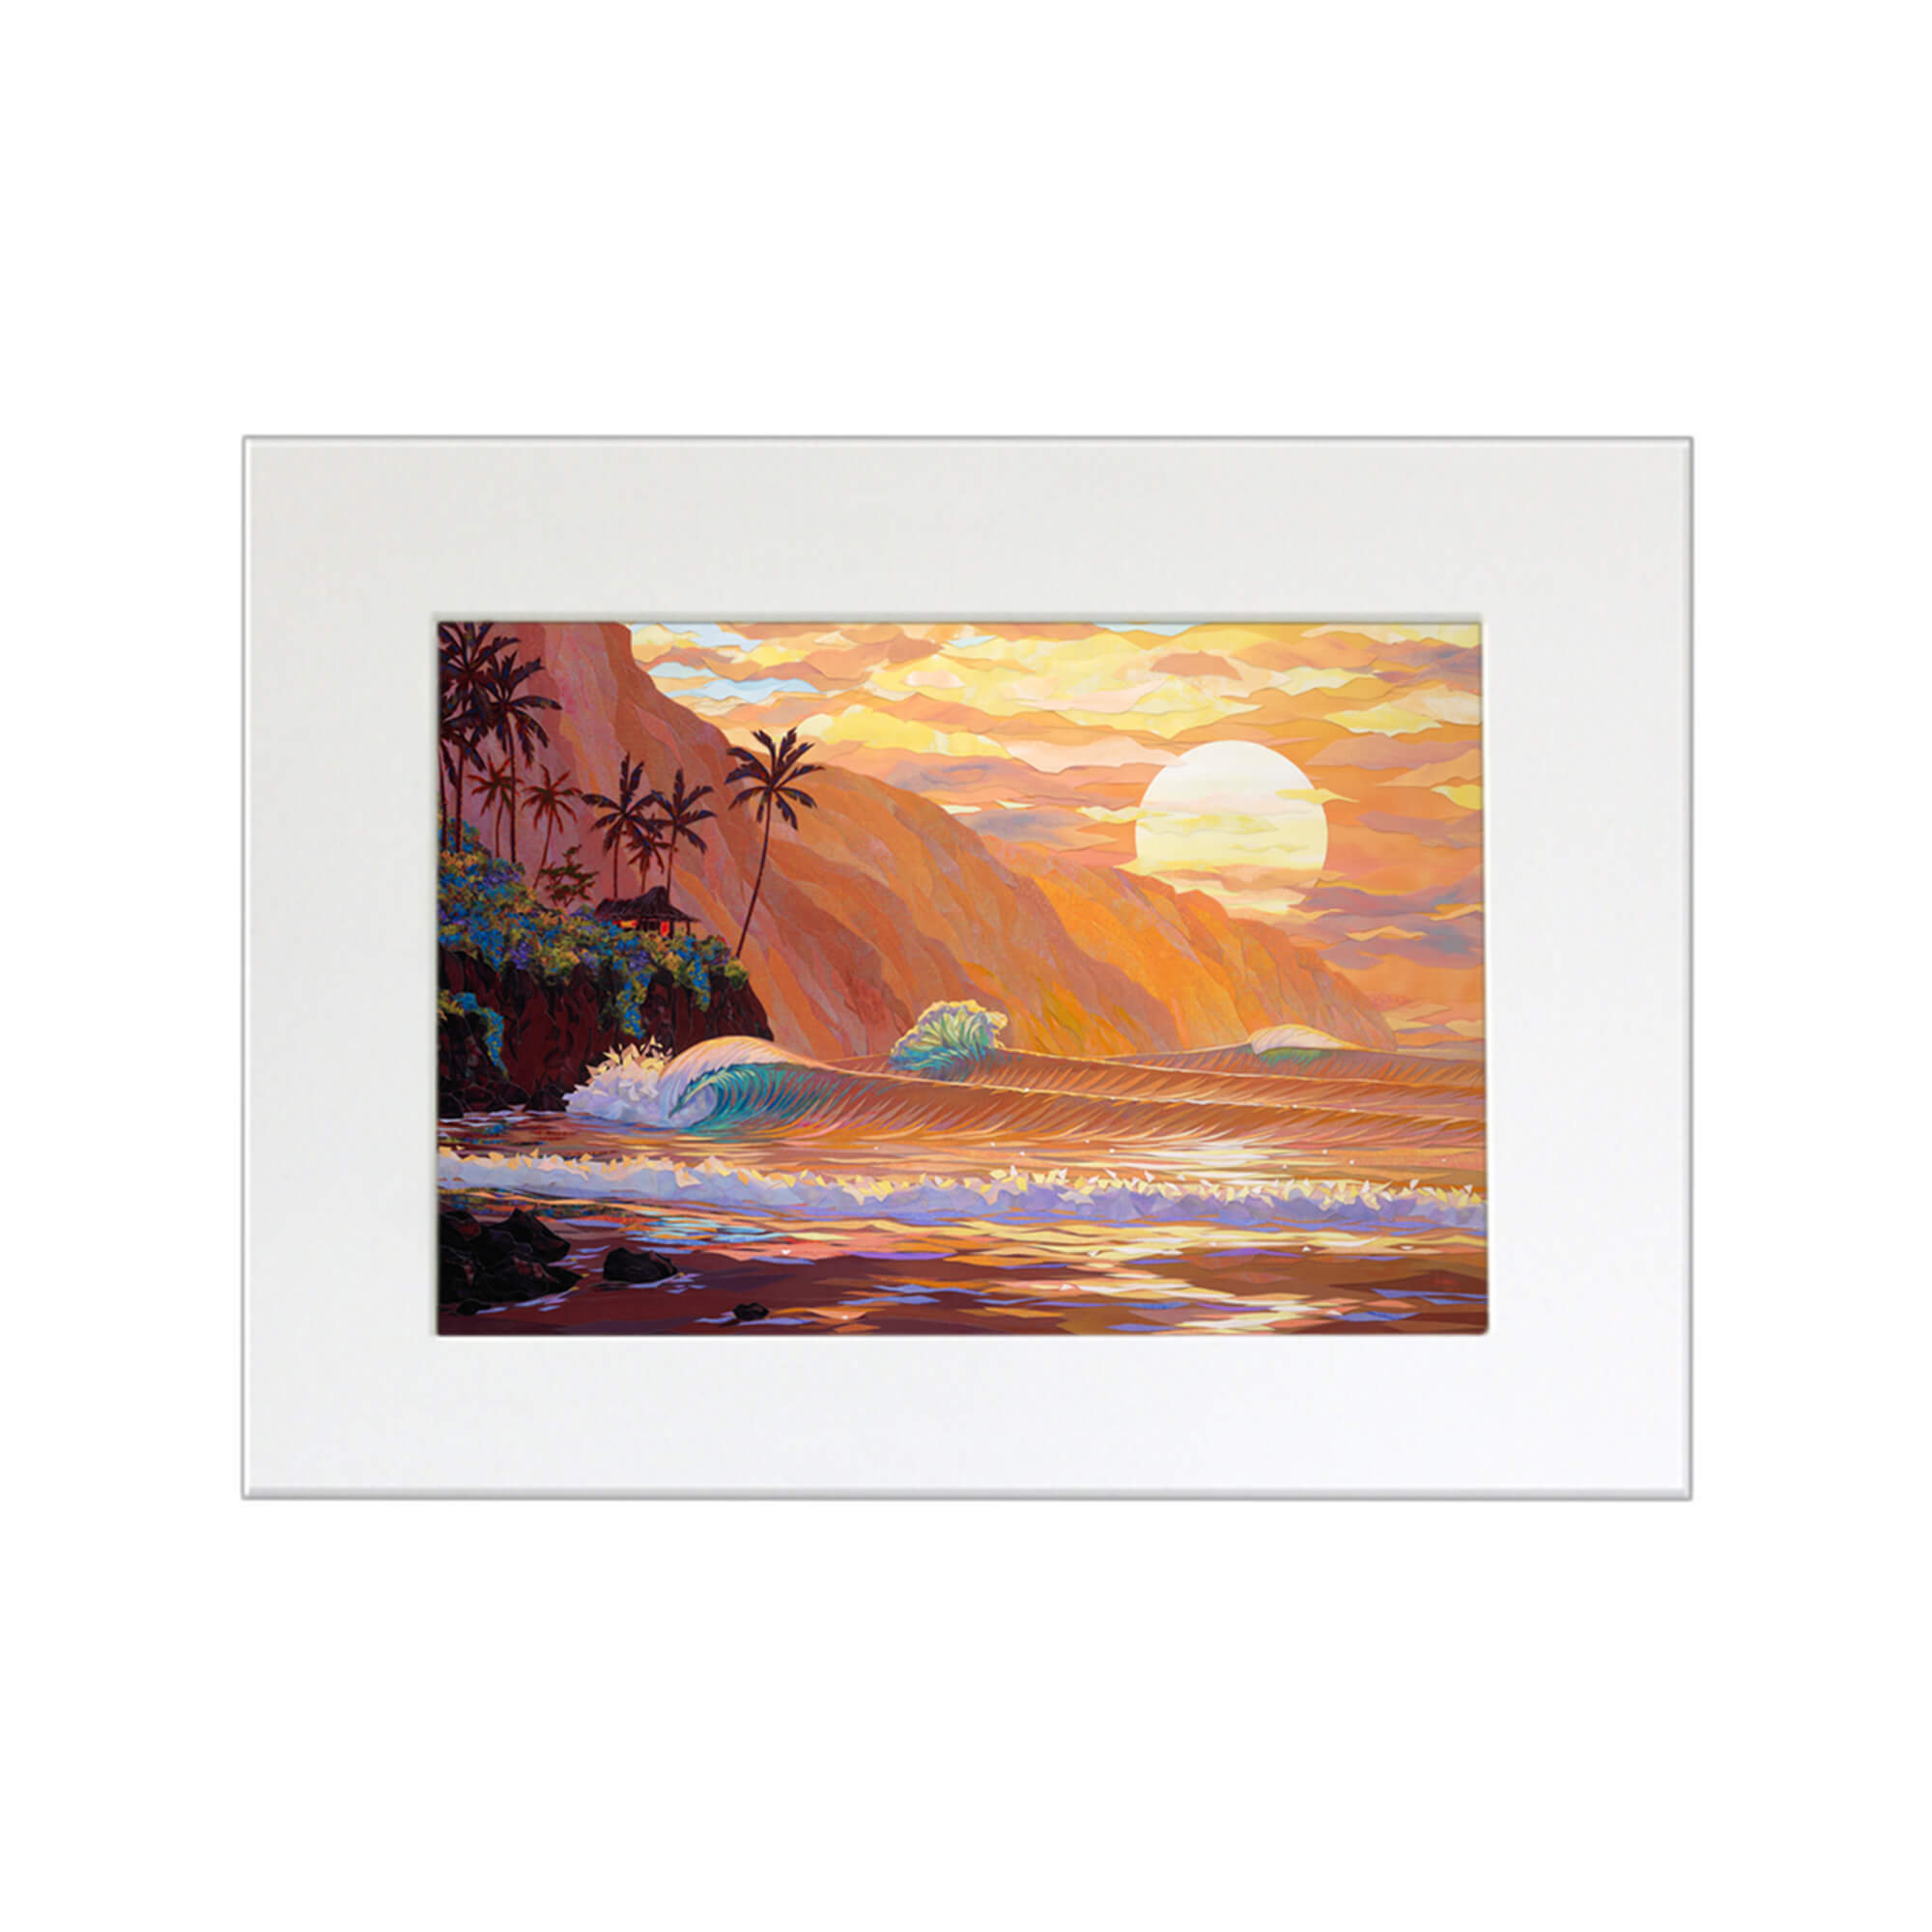 A matted art print featuring a collage of a sunset view of the ocean as seen from a tropical beach in Hawaii by Hawaii artist Patrick Parker